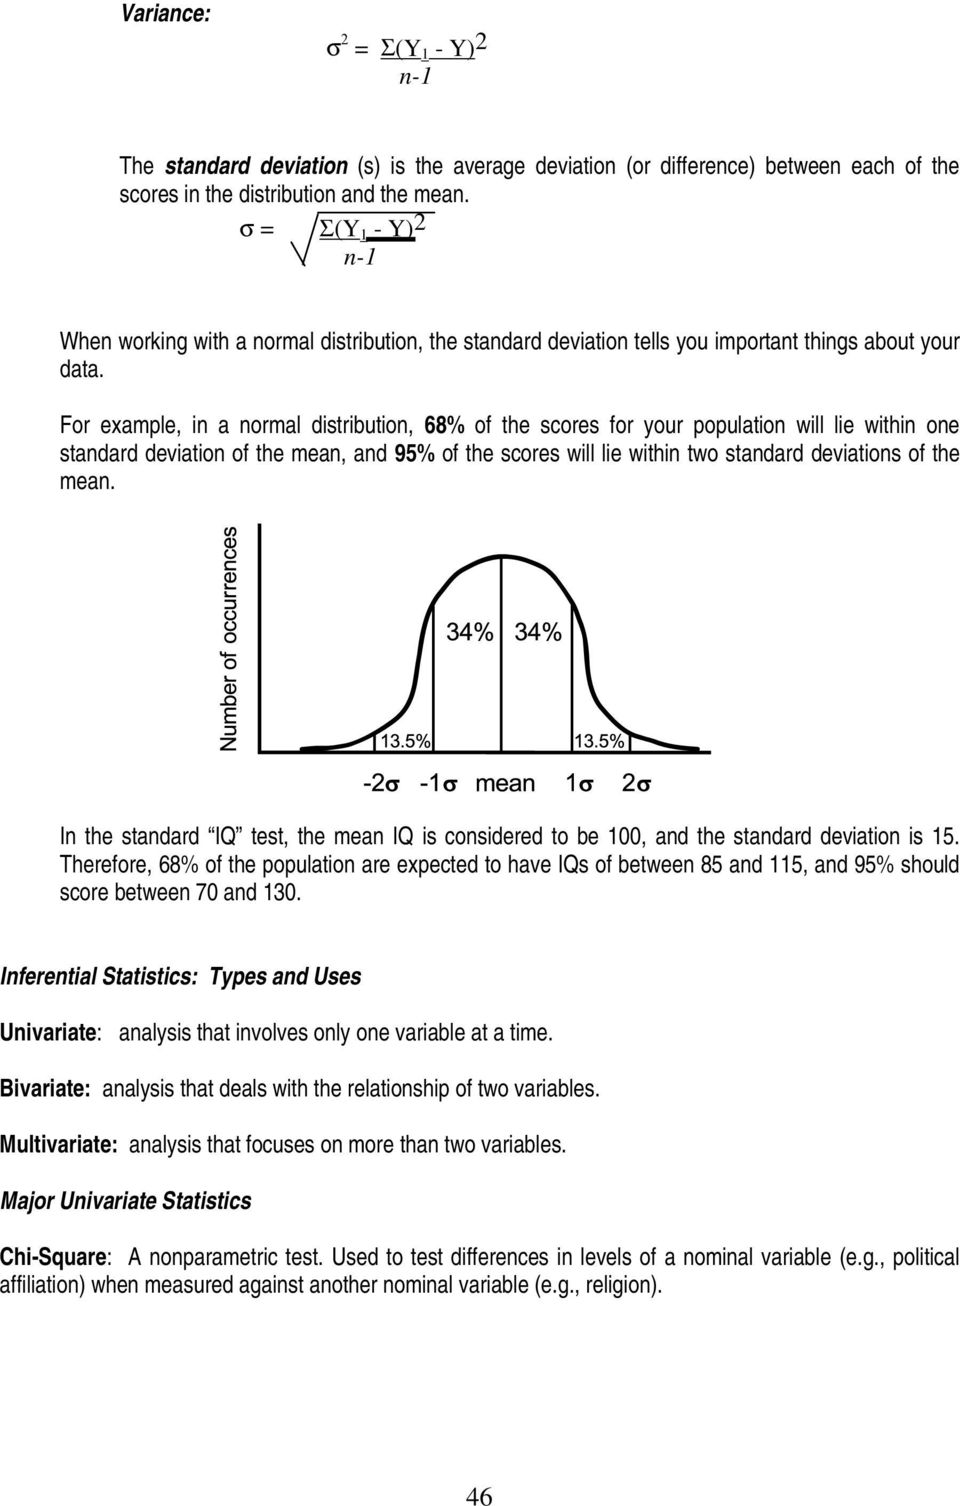 For example, in a normal distribution, 68% of the scores for your population will lie within one standard deviation of the mean, and 95% of the scores will lie within two standard deviations of the